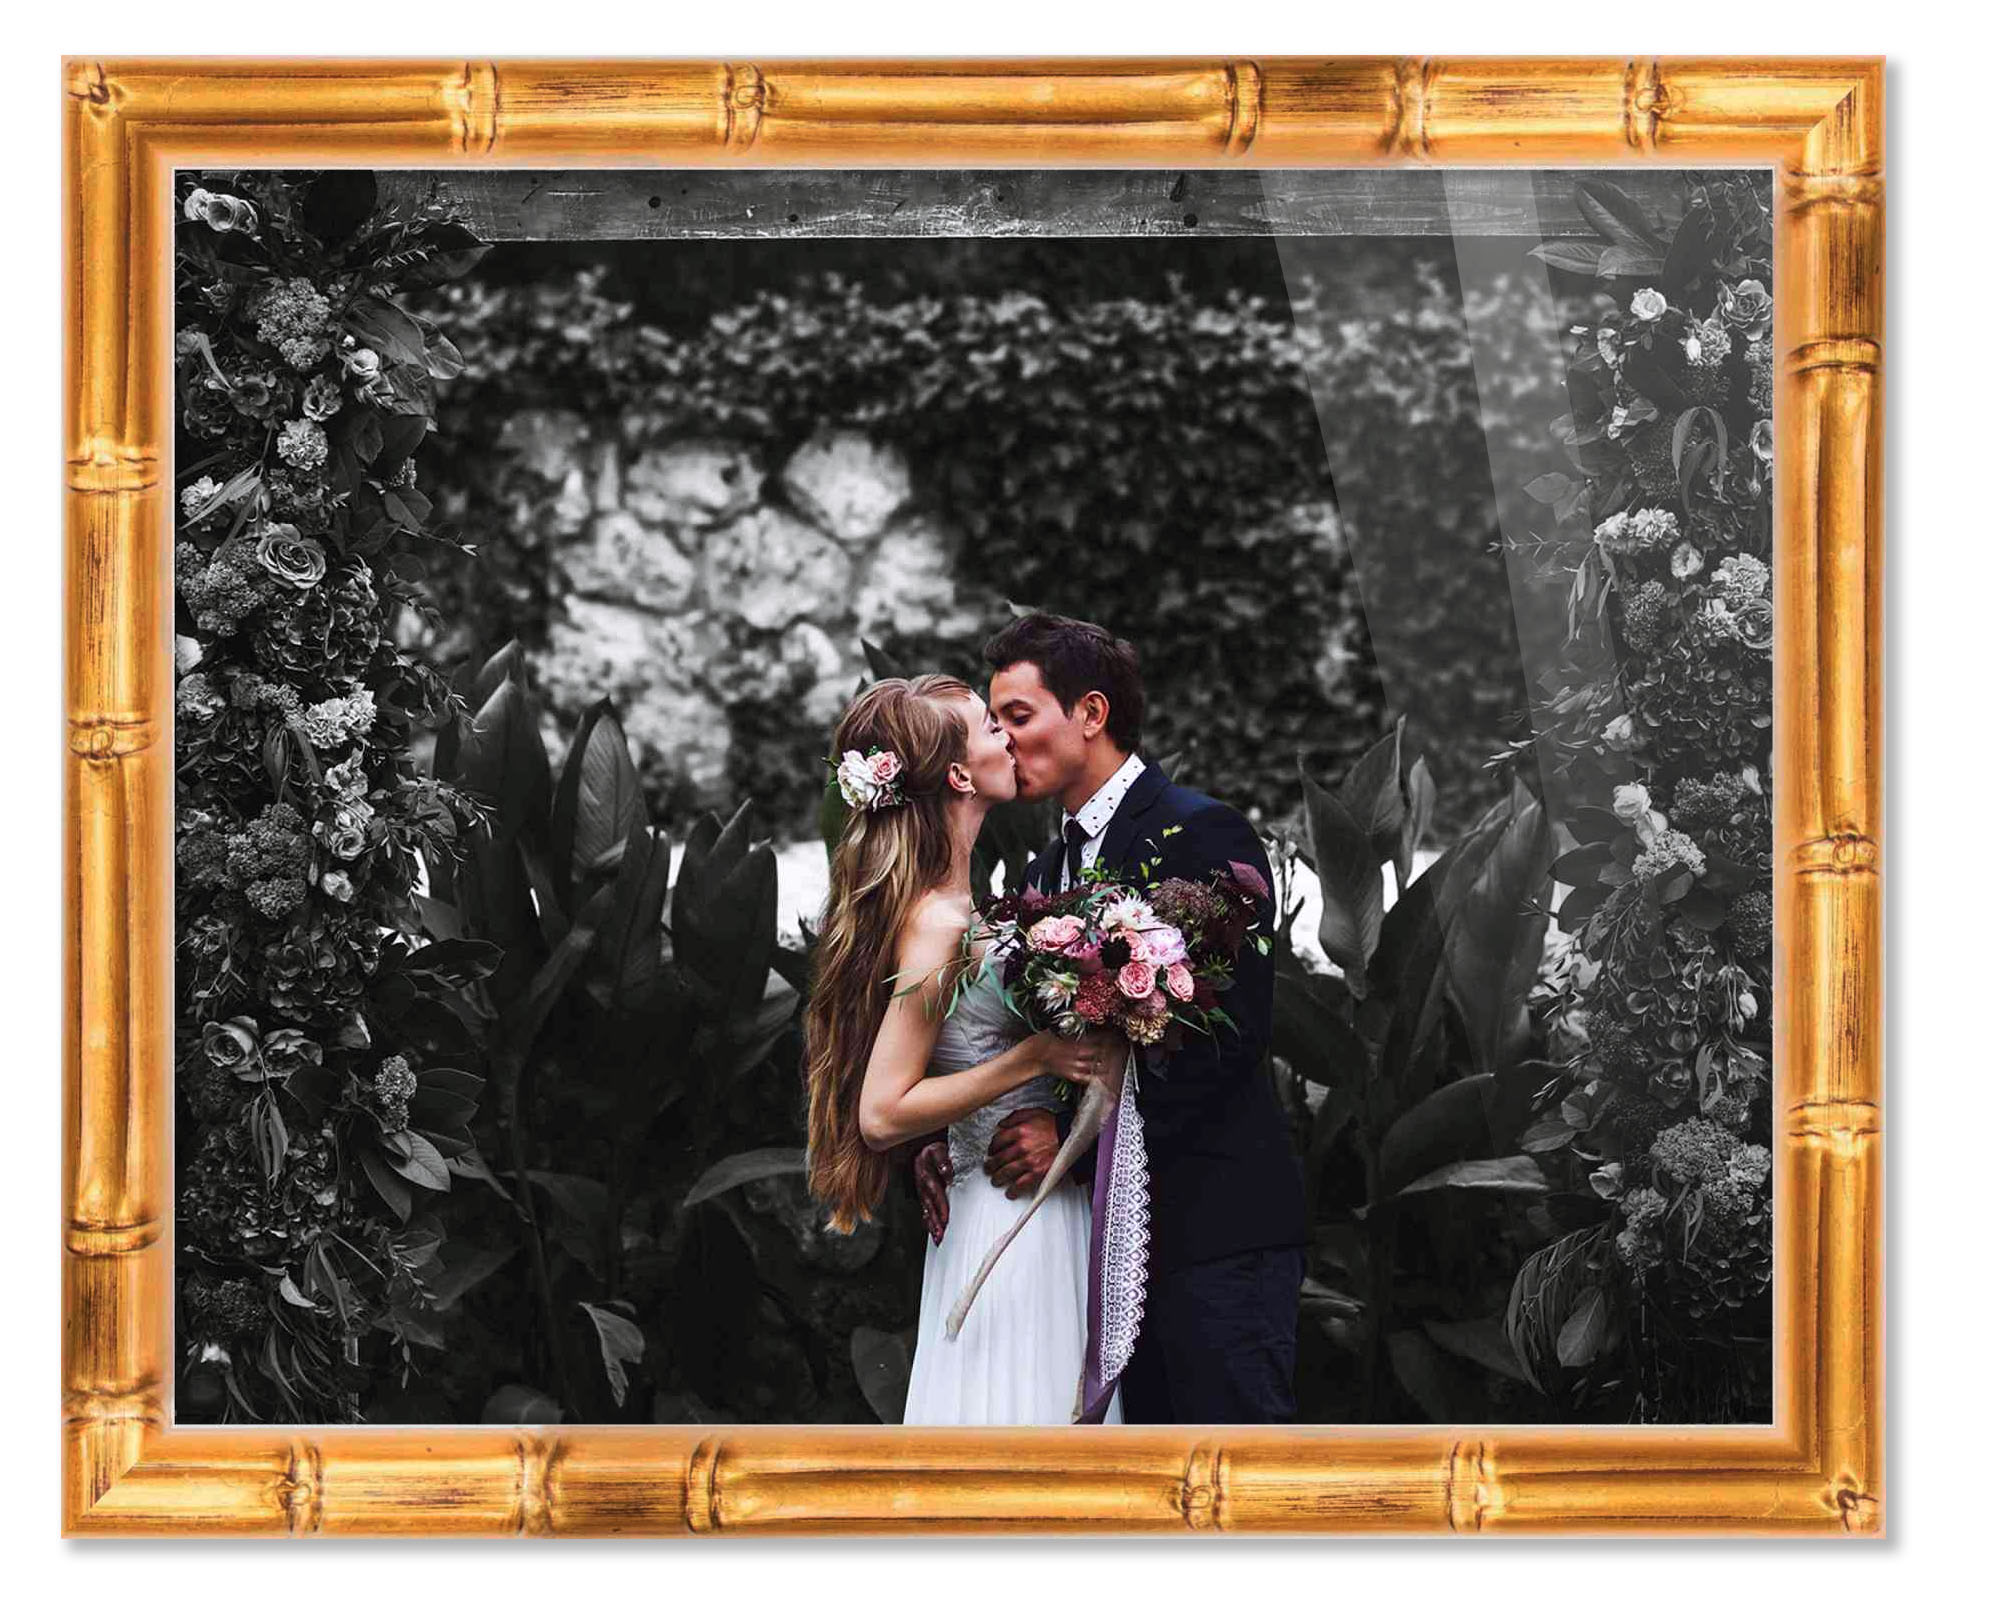 CustomPictureFrames.com 22x36 Frame Gold Bamboo Picture Frame - Complete Modern Photo Frame Includes UV Acrylic Shatter Guard Front, Acid Free Foam